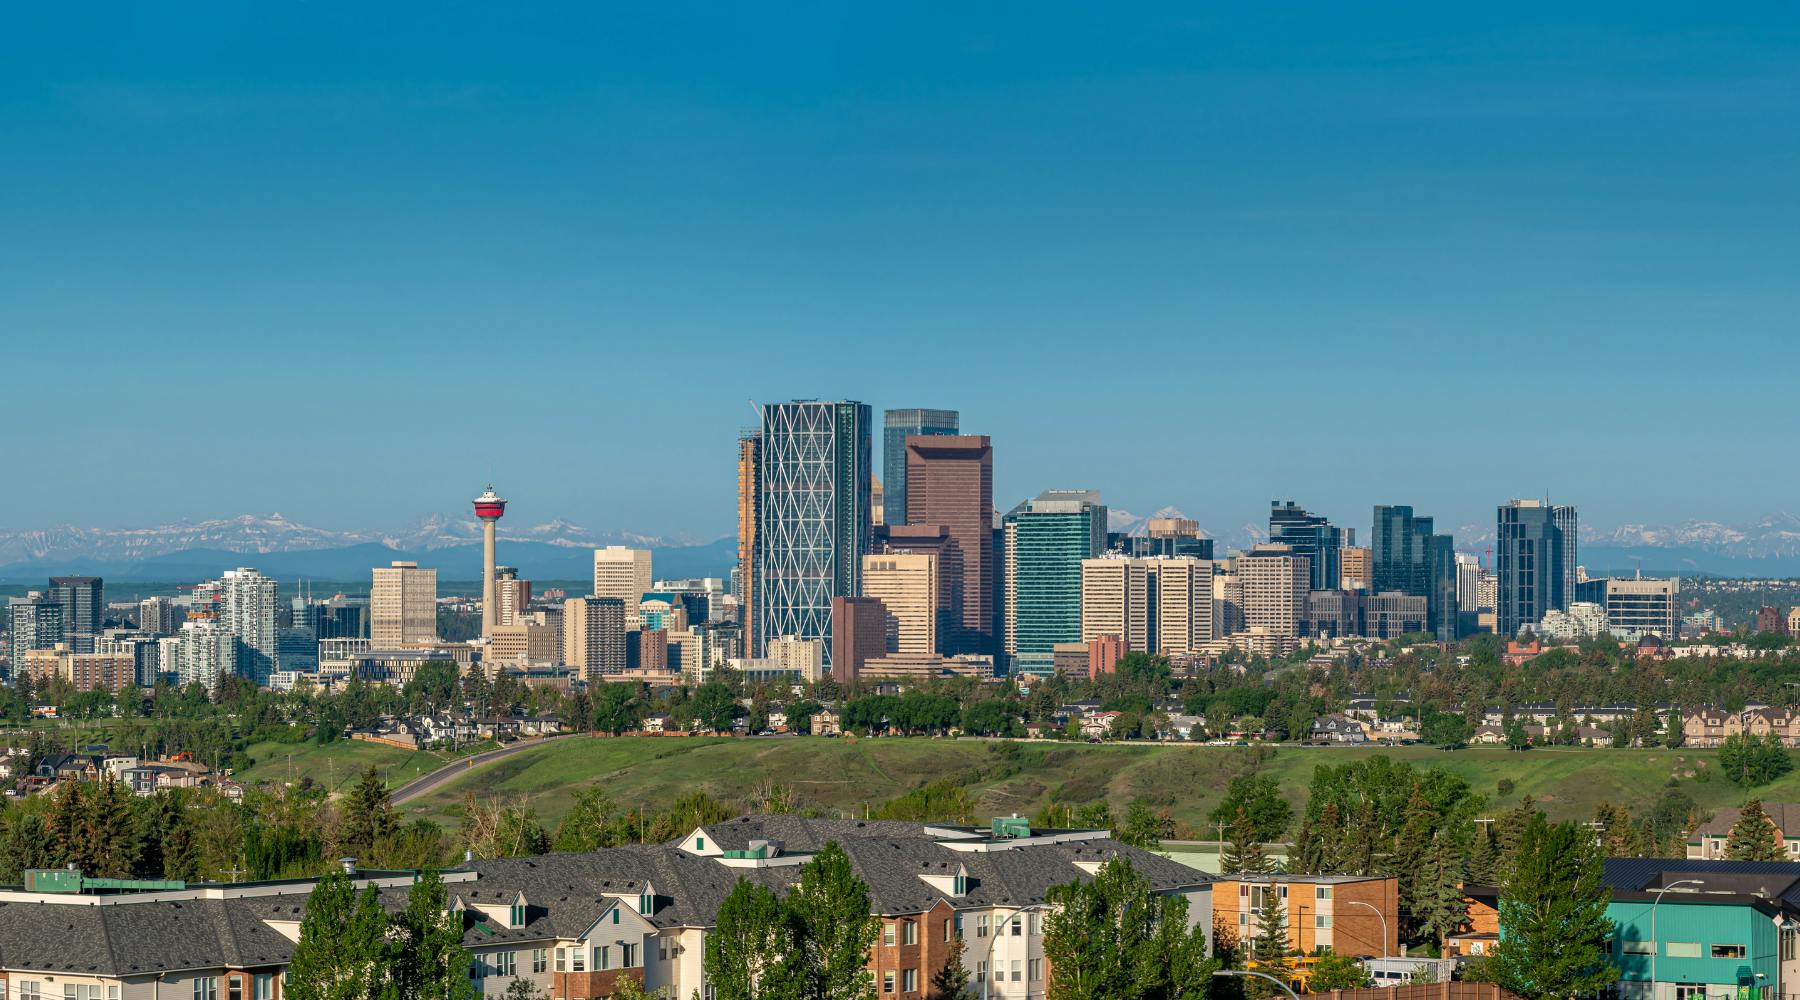 Calgary's skyline with houses in the foreground